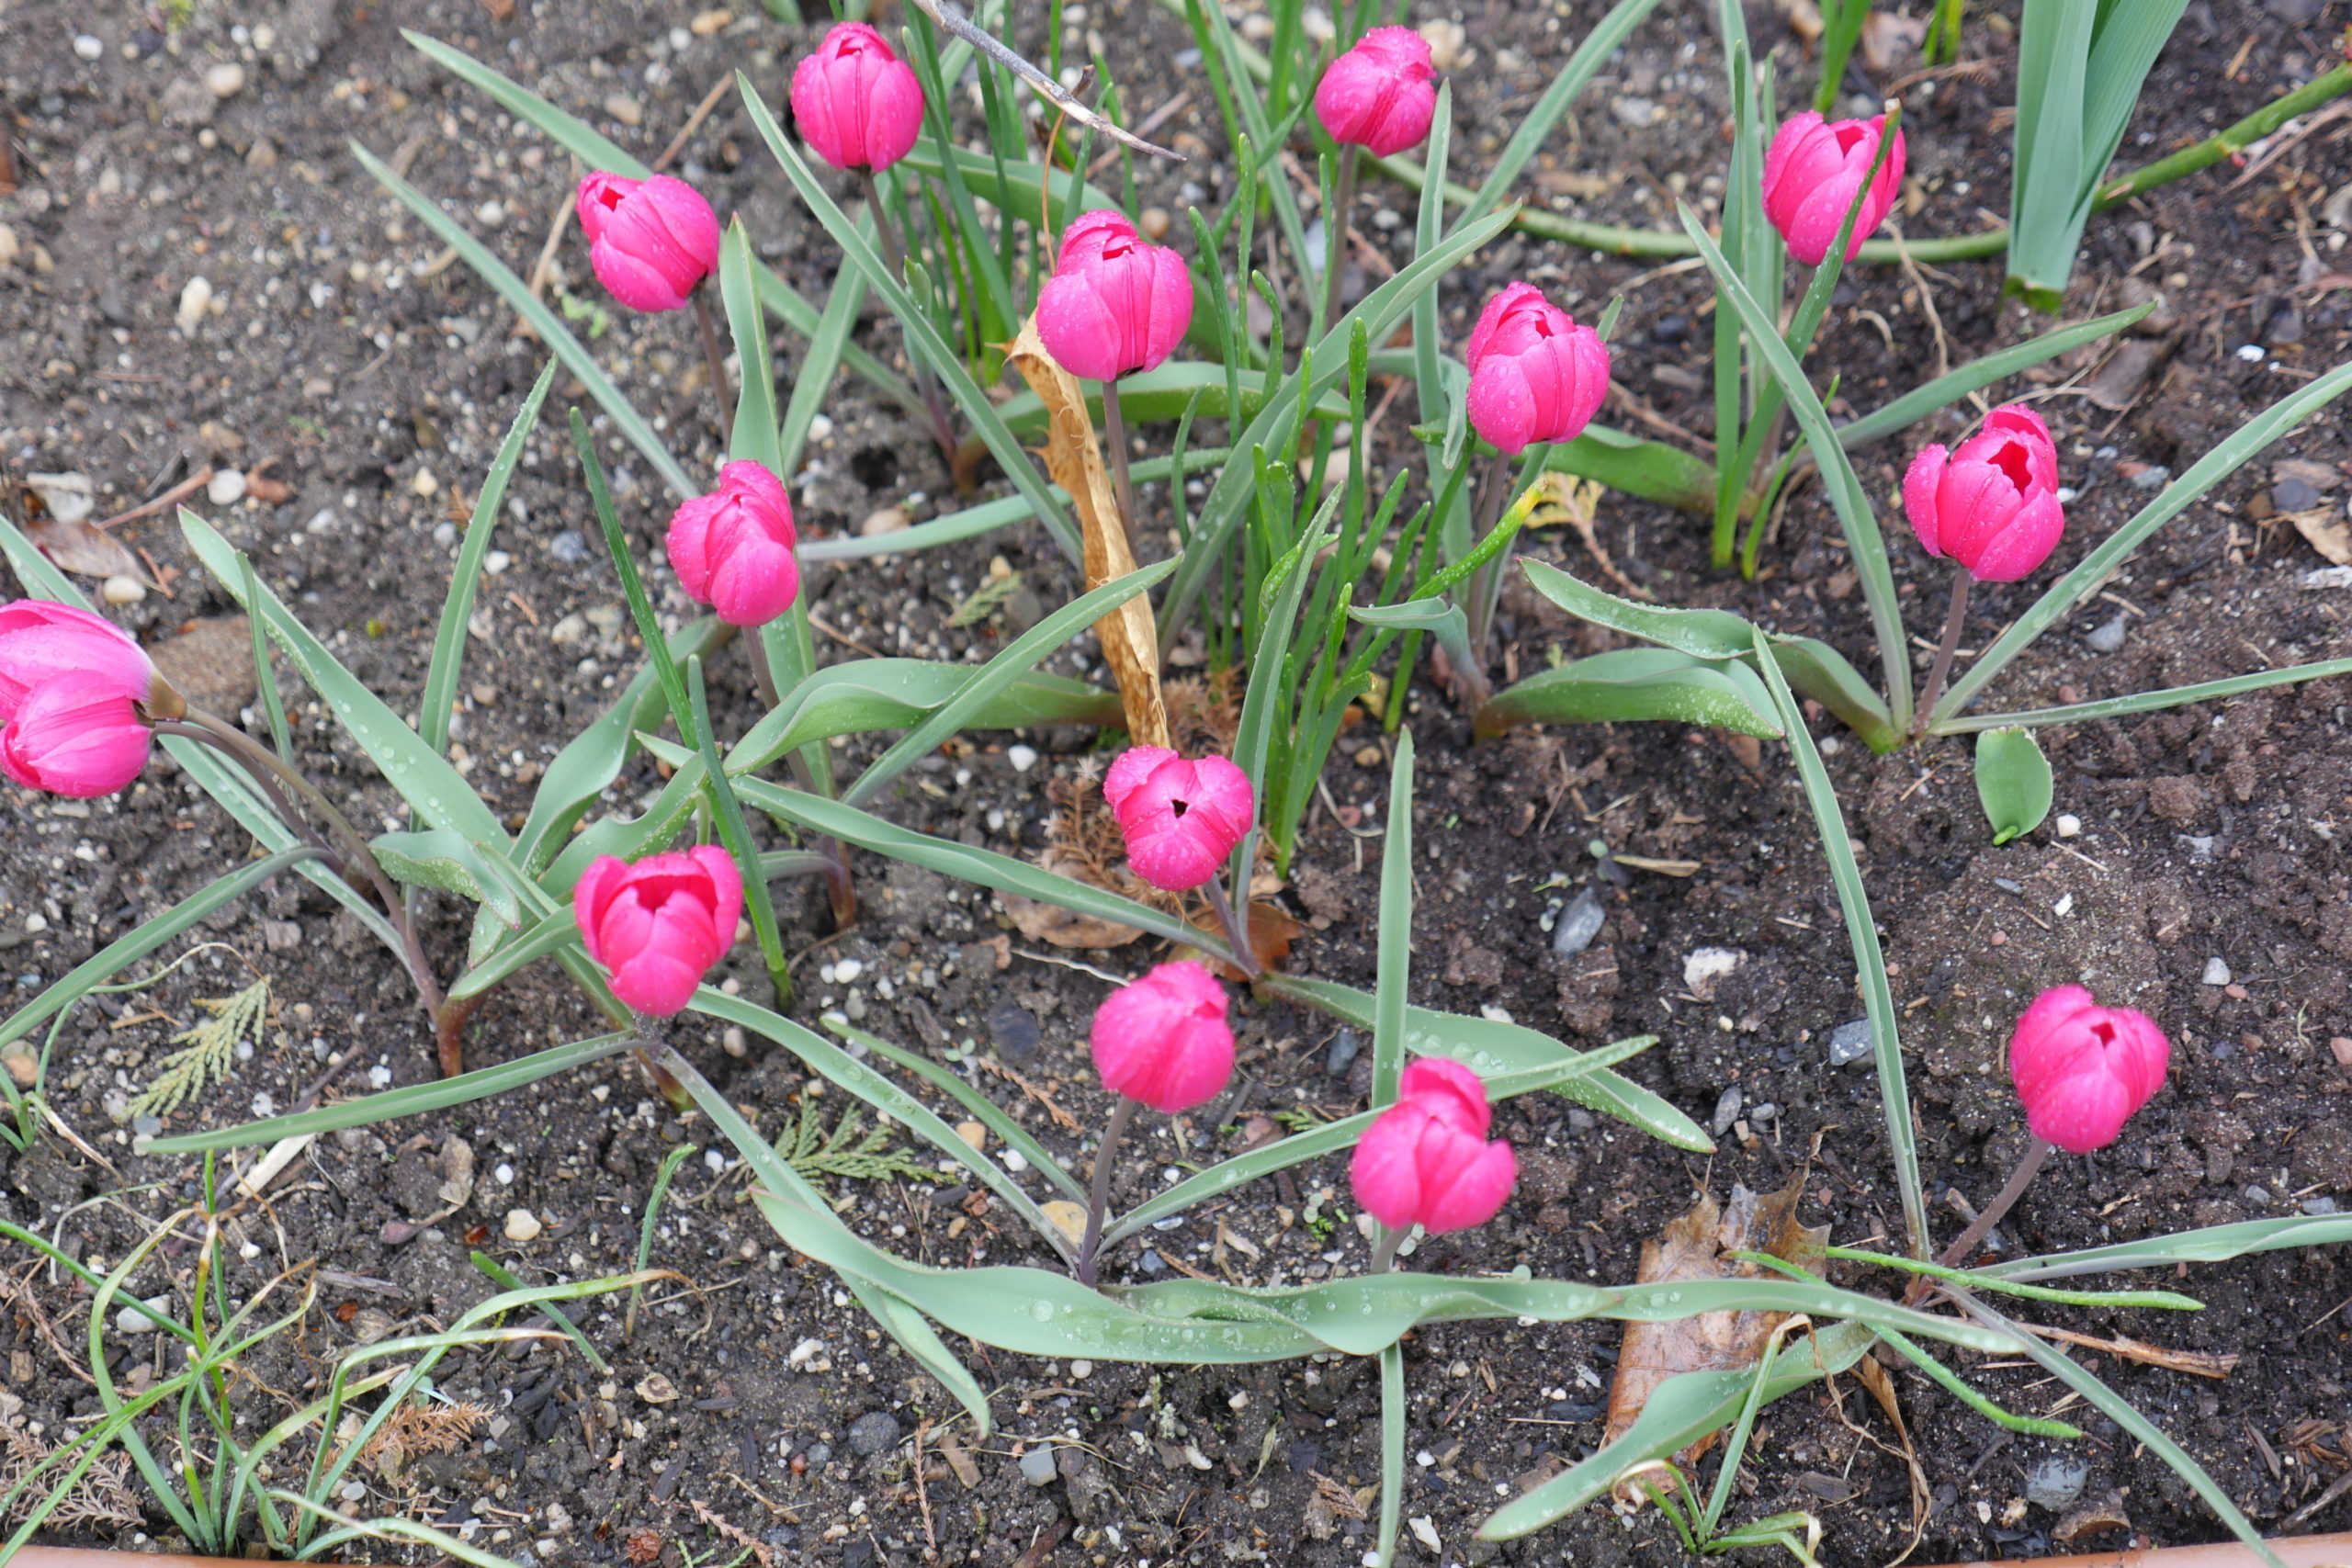 Botanical tulips, or species tulips, may not be as striking as some of the taller hybrids, but these will return year after year in naturalized plantings.